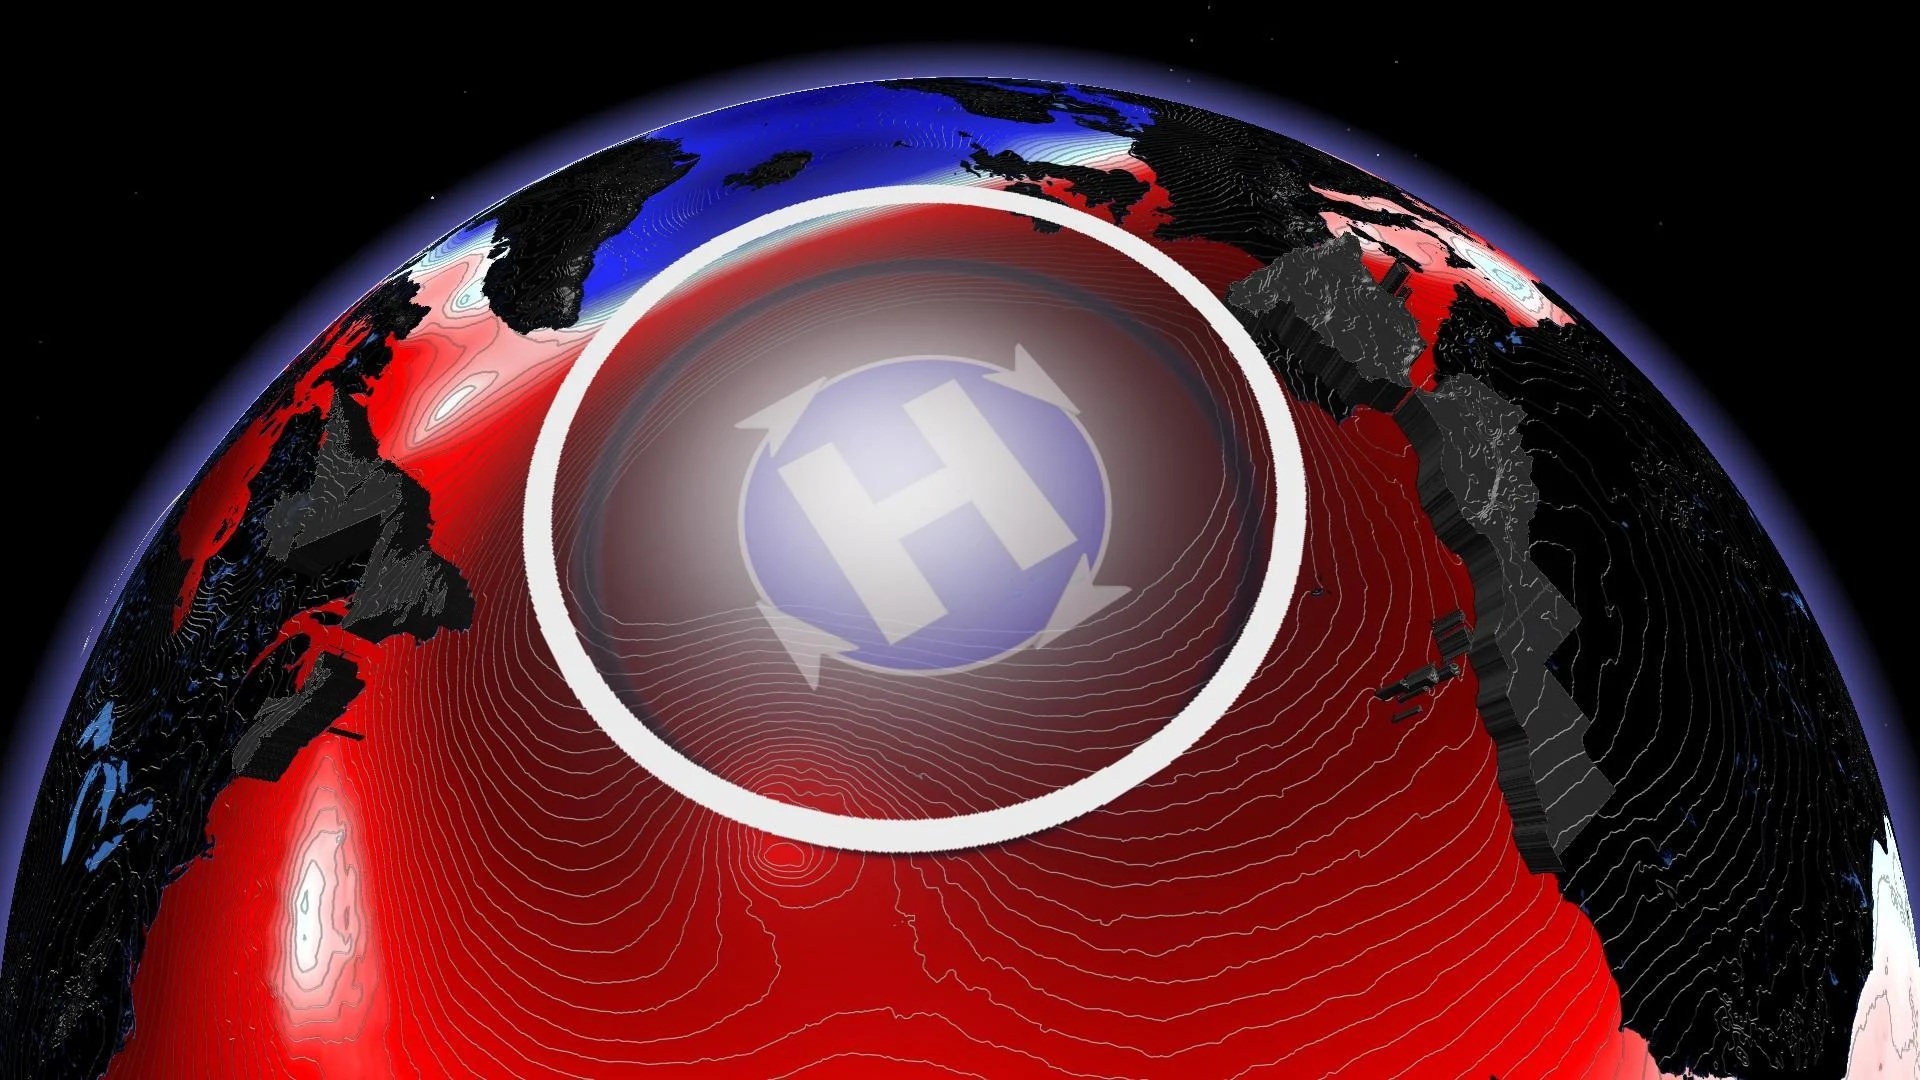 Record-breaking high pressure is stirring up trouble in the Atlantic